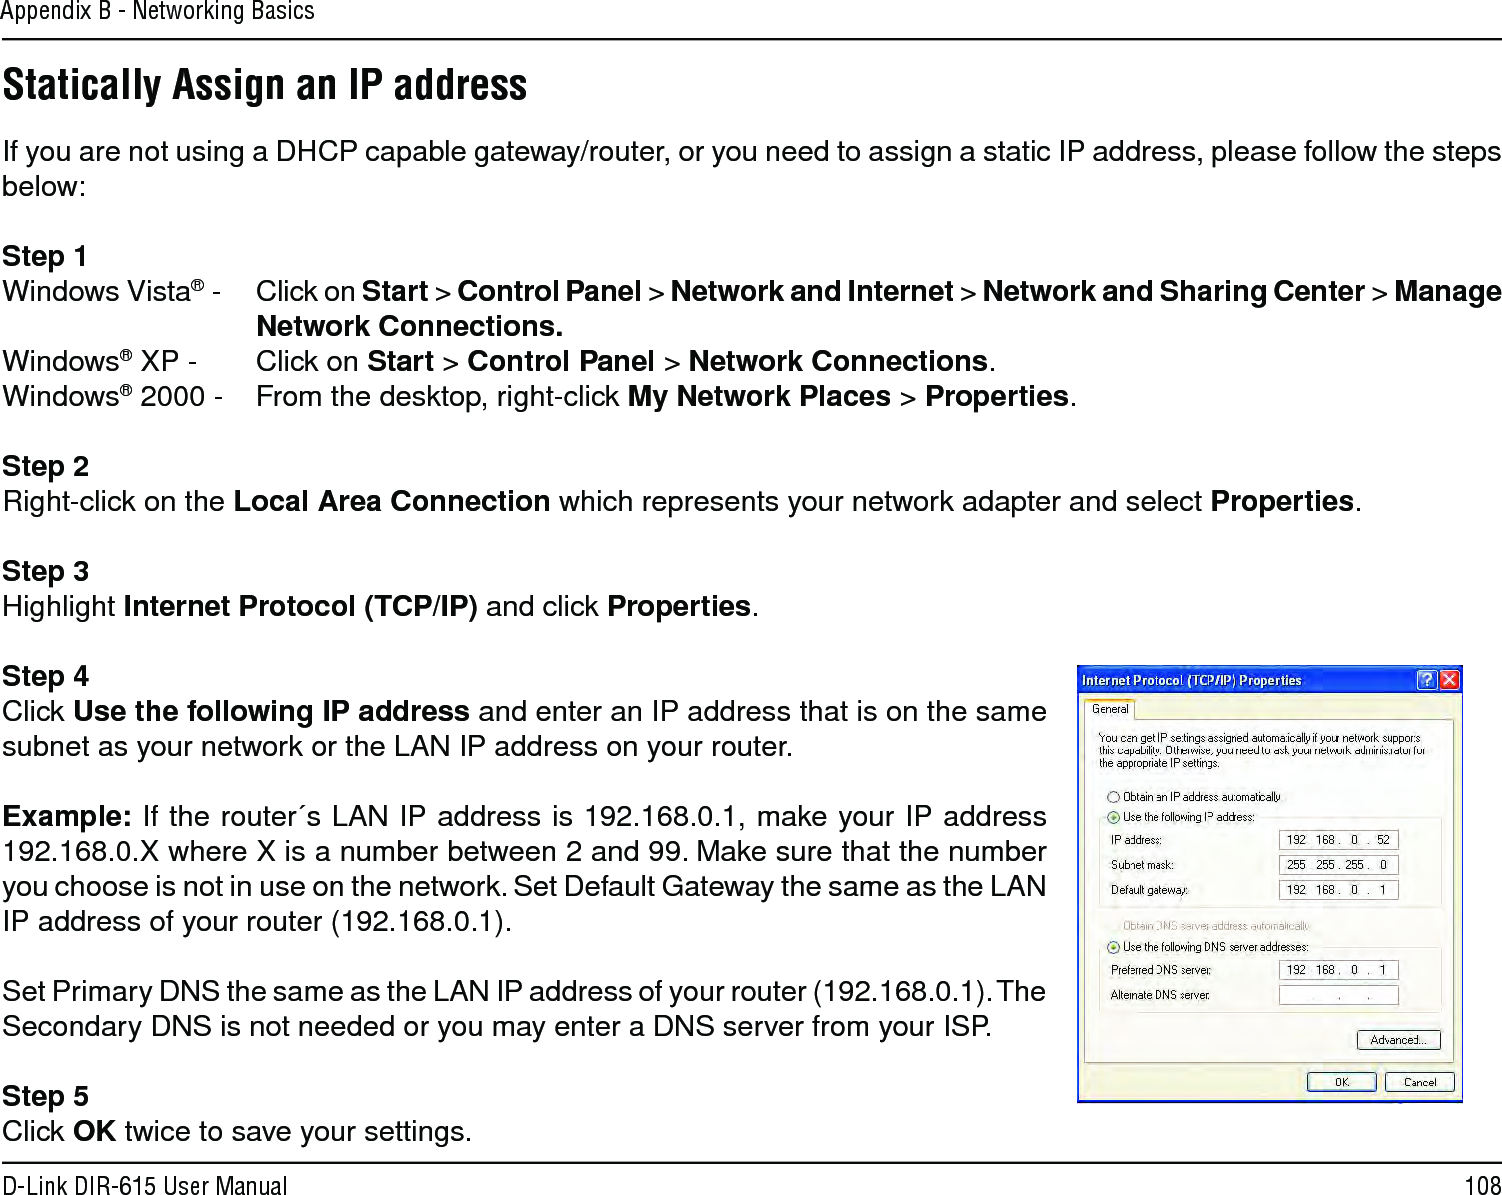 108D-Link DIR-615 User ManualAppendix B - Networking BasicsStatically Assign an IP addressIf you are not using a DHCP capable gateway/router, or you need to assign a static IP address, please follow the steps below:Step 1Windows Vista® -  Click on Start &gt; Control Panel &gt; Network and Internet &gt; Network and Sharing Center &gt; Manage Network Connections.Windows® XP -  Click on Start &gt; Control Panel &gt; Network Connections.Windows® 2000 -  From the desktop, right-click My Network Places &gt; Properties.Step 2Right-click on the Local Area Connection which represents your network adapter and select Properties.Step 3Highlight Internet Protocol (TCP/IP) and click Properties.Step 4Click Use the following IP address and enter an IP address that is on the same subnet as your network or the LAN IP address on your router. Example: If the router´s LAN IP address is 192.168.0.1, make your IP address 192.168.0.X where X is a number between 2 and 99. Make sure that the number you choose is not in use on the network. Set Default Gateway the same as the LAN IP address of your router (192.168.0.1). Set Primary DNS the same as the LAN IP address of your router (192.168.0.1). The Secondary DNS is not needed or you may enter a DNS server from your ISP.Step 5Click OK twice to save your settings.